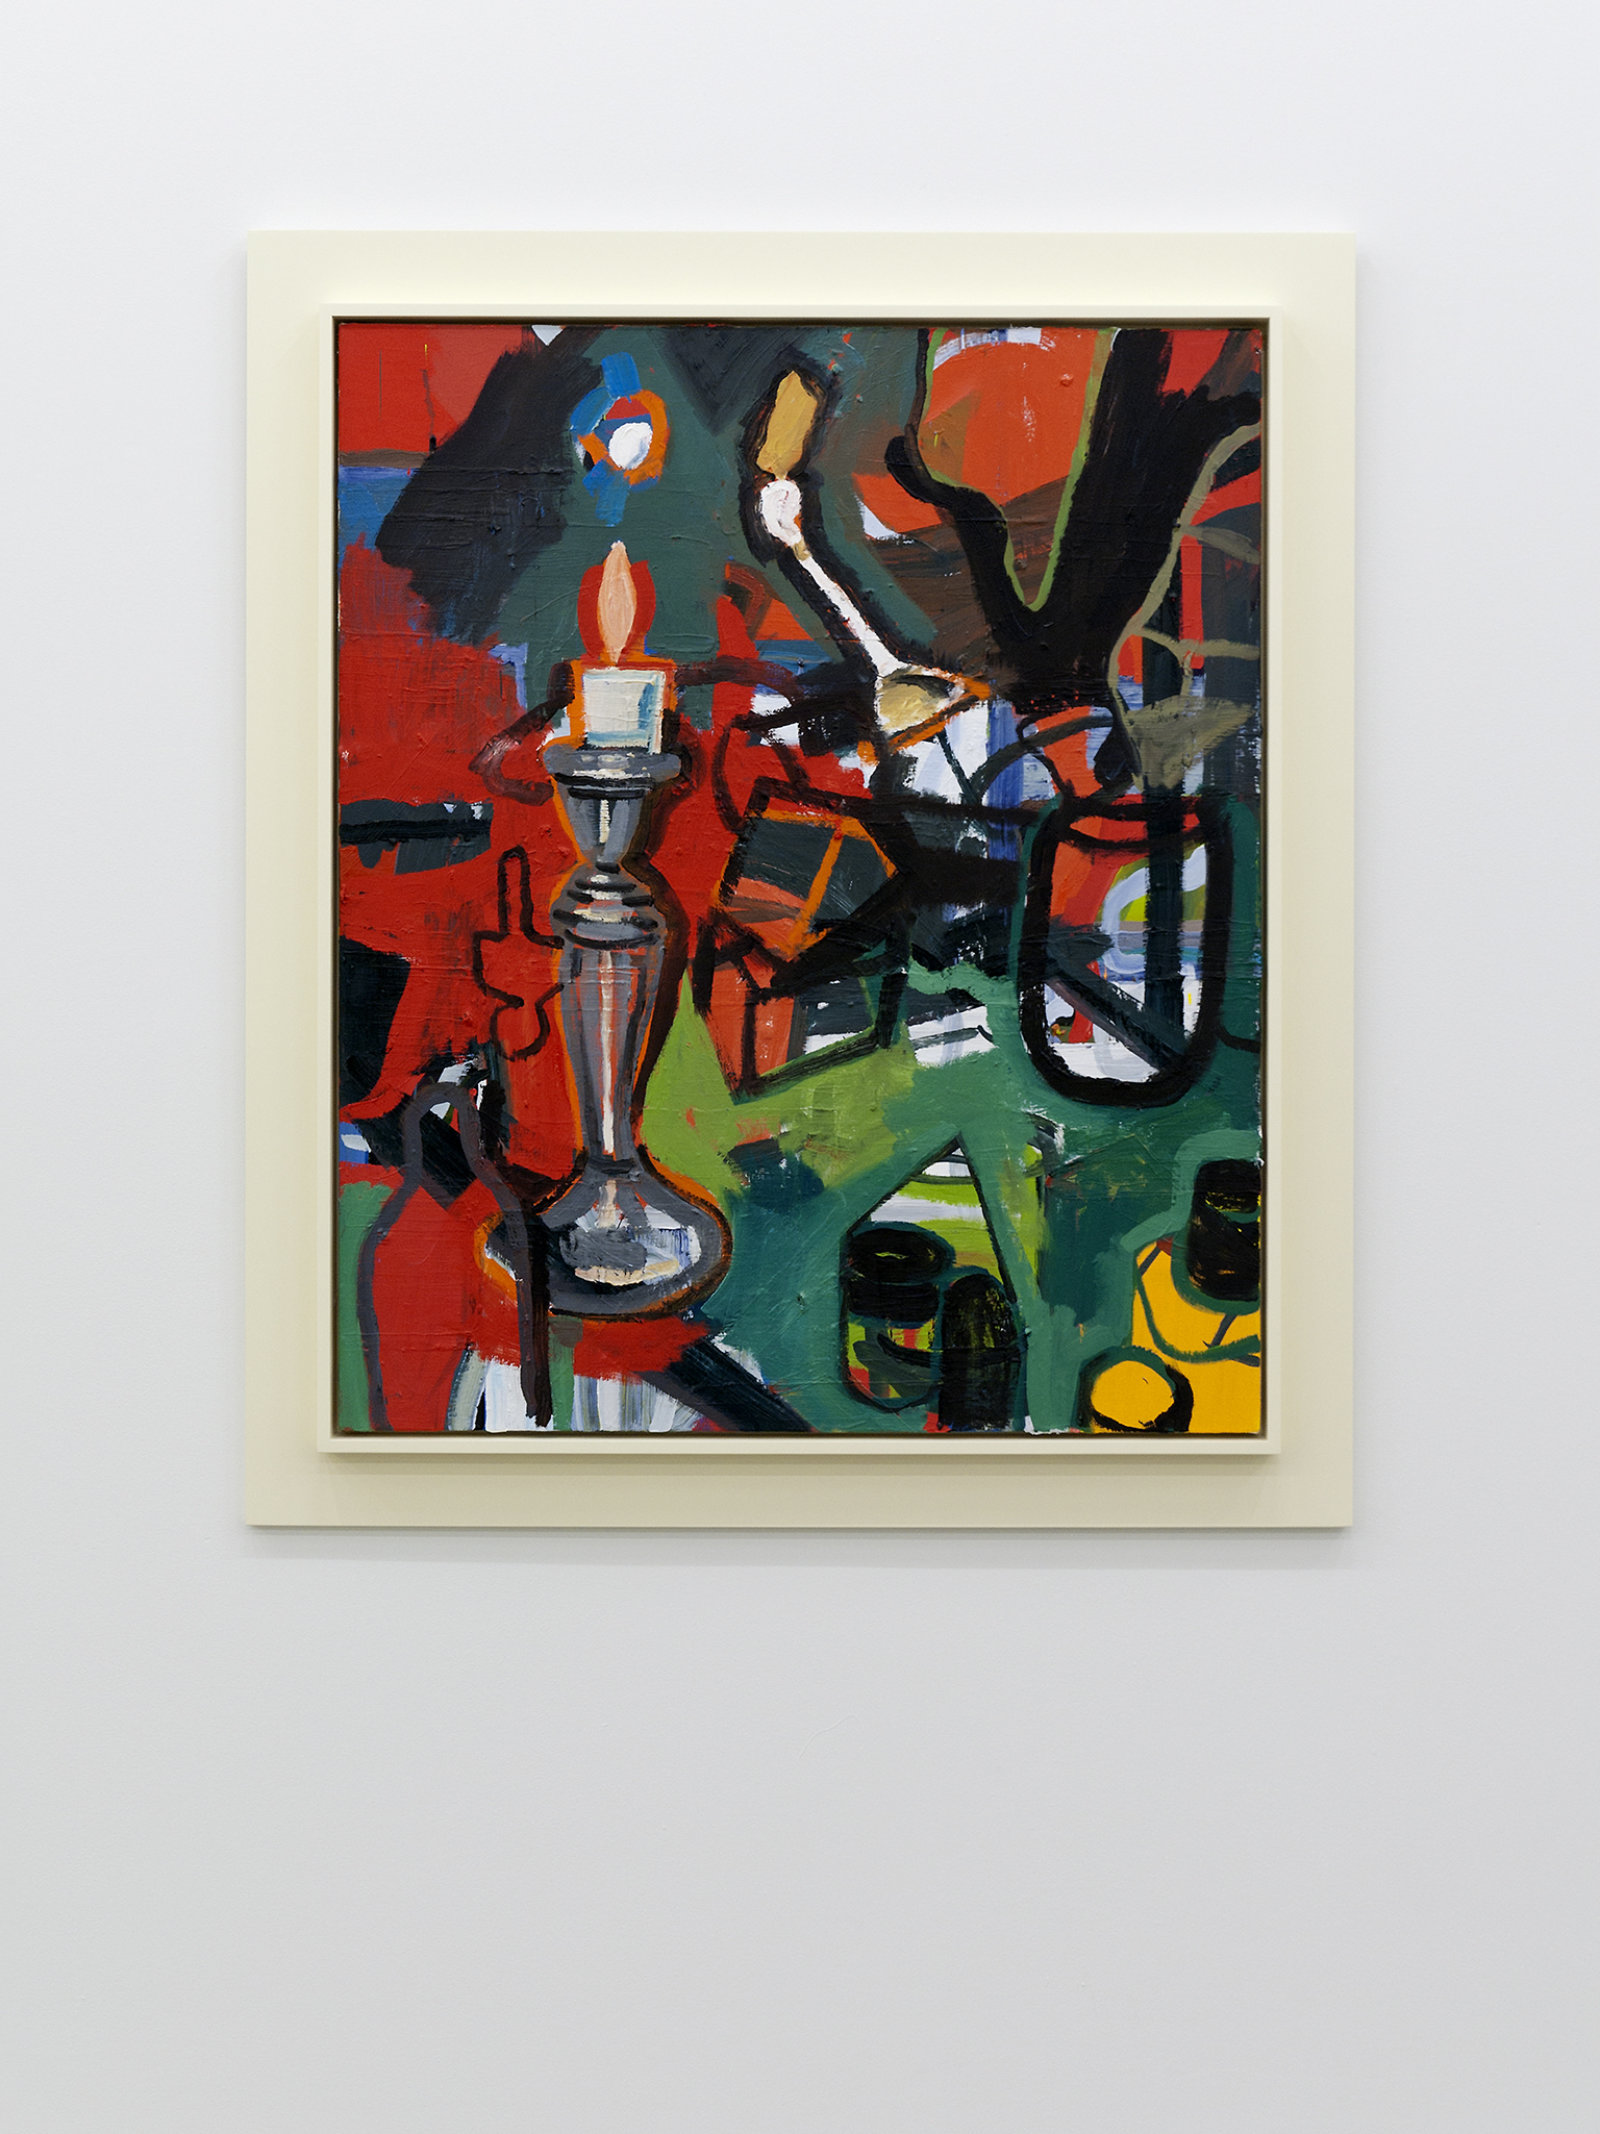 Damian Moppett, Large Red Candle, 2010, oil on canvas and wood frame, 50 x 44 in. (126 x 110 cm)